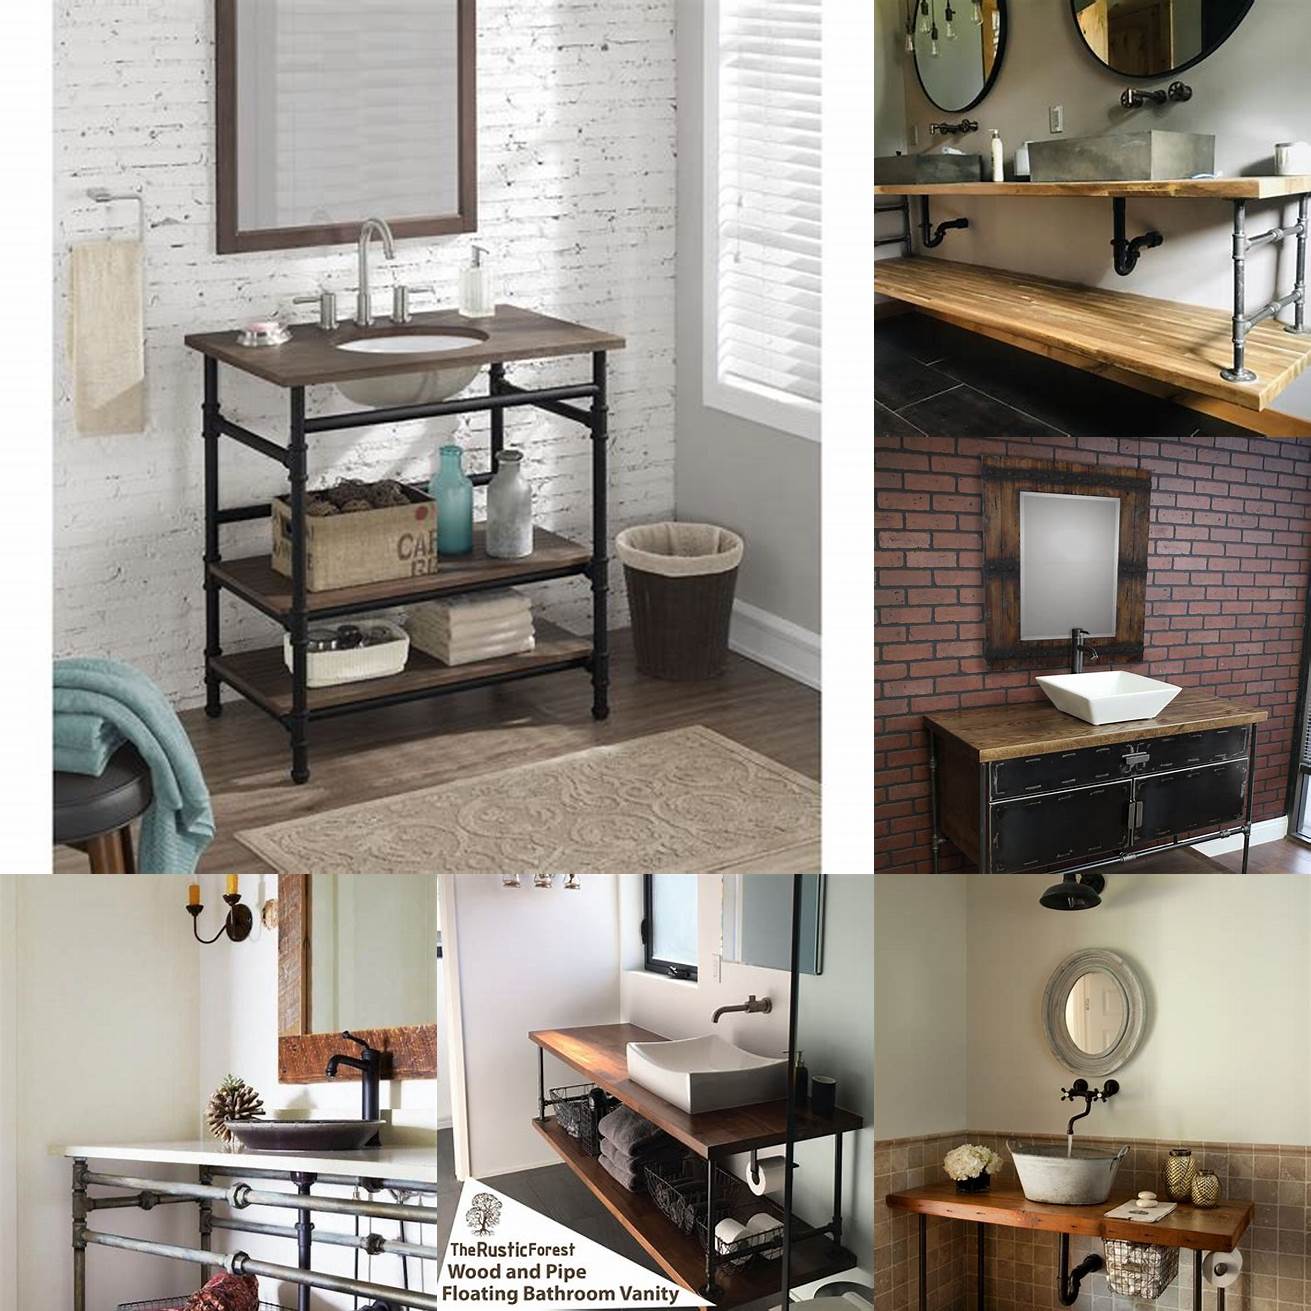 4 Industrial-style metal vanity with exposed pipes